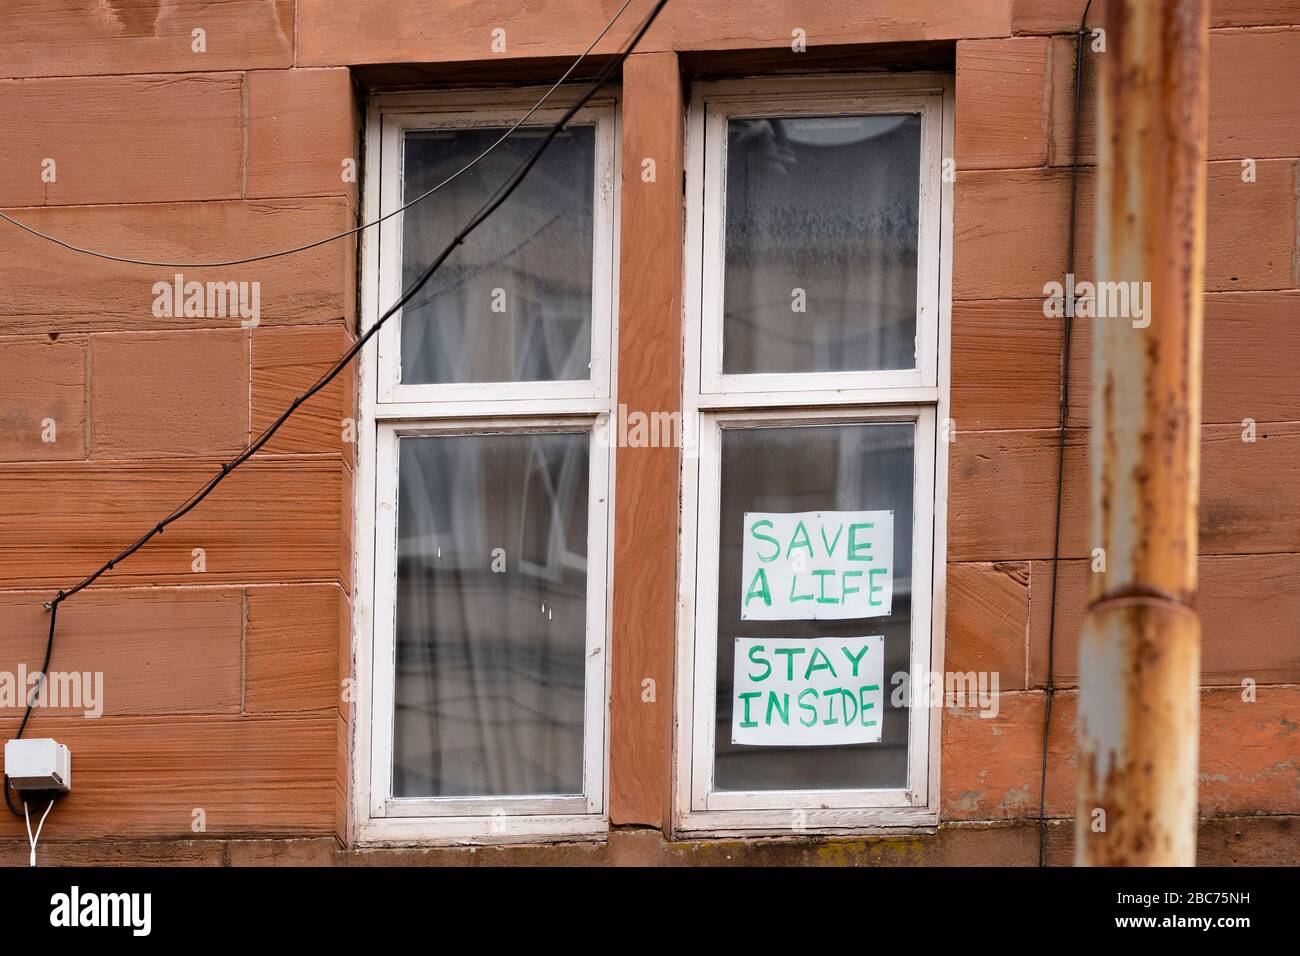 Glasgow, Scotland, UK. 3 April, 2020. Images from the southside of Glasgow at the end of the second week of Coronavirus lockdown. Pictured; hand drawn rainbows and messages in windows of flats in Govanhill and Shawlands. Iain Masterton/Alamy Live News Stock Photo